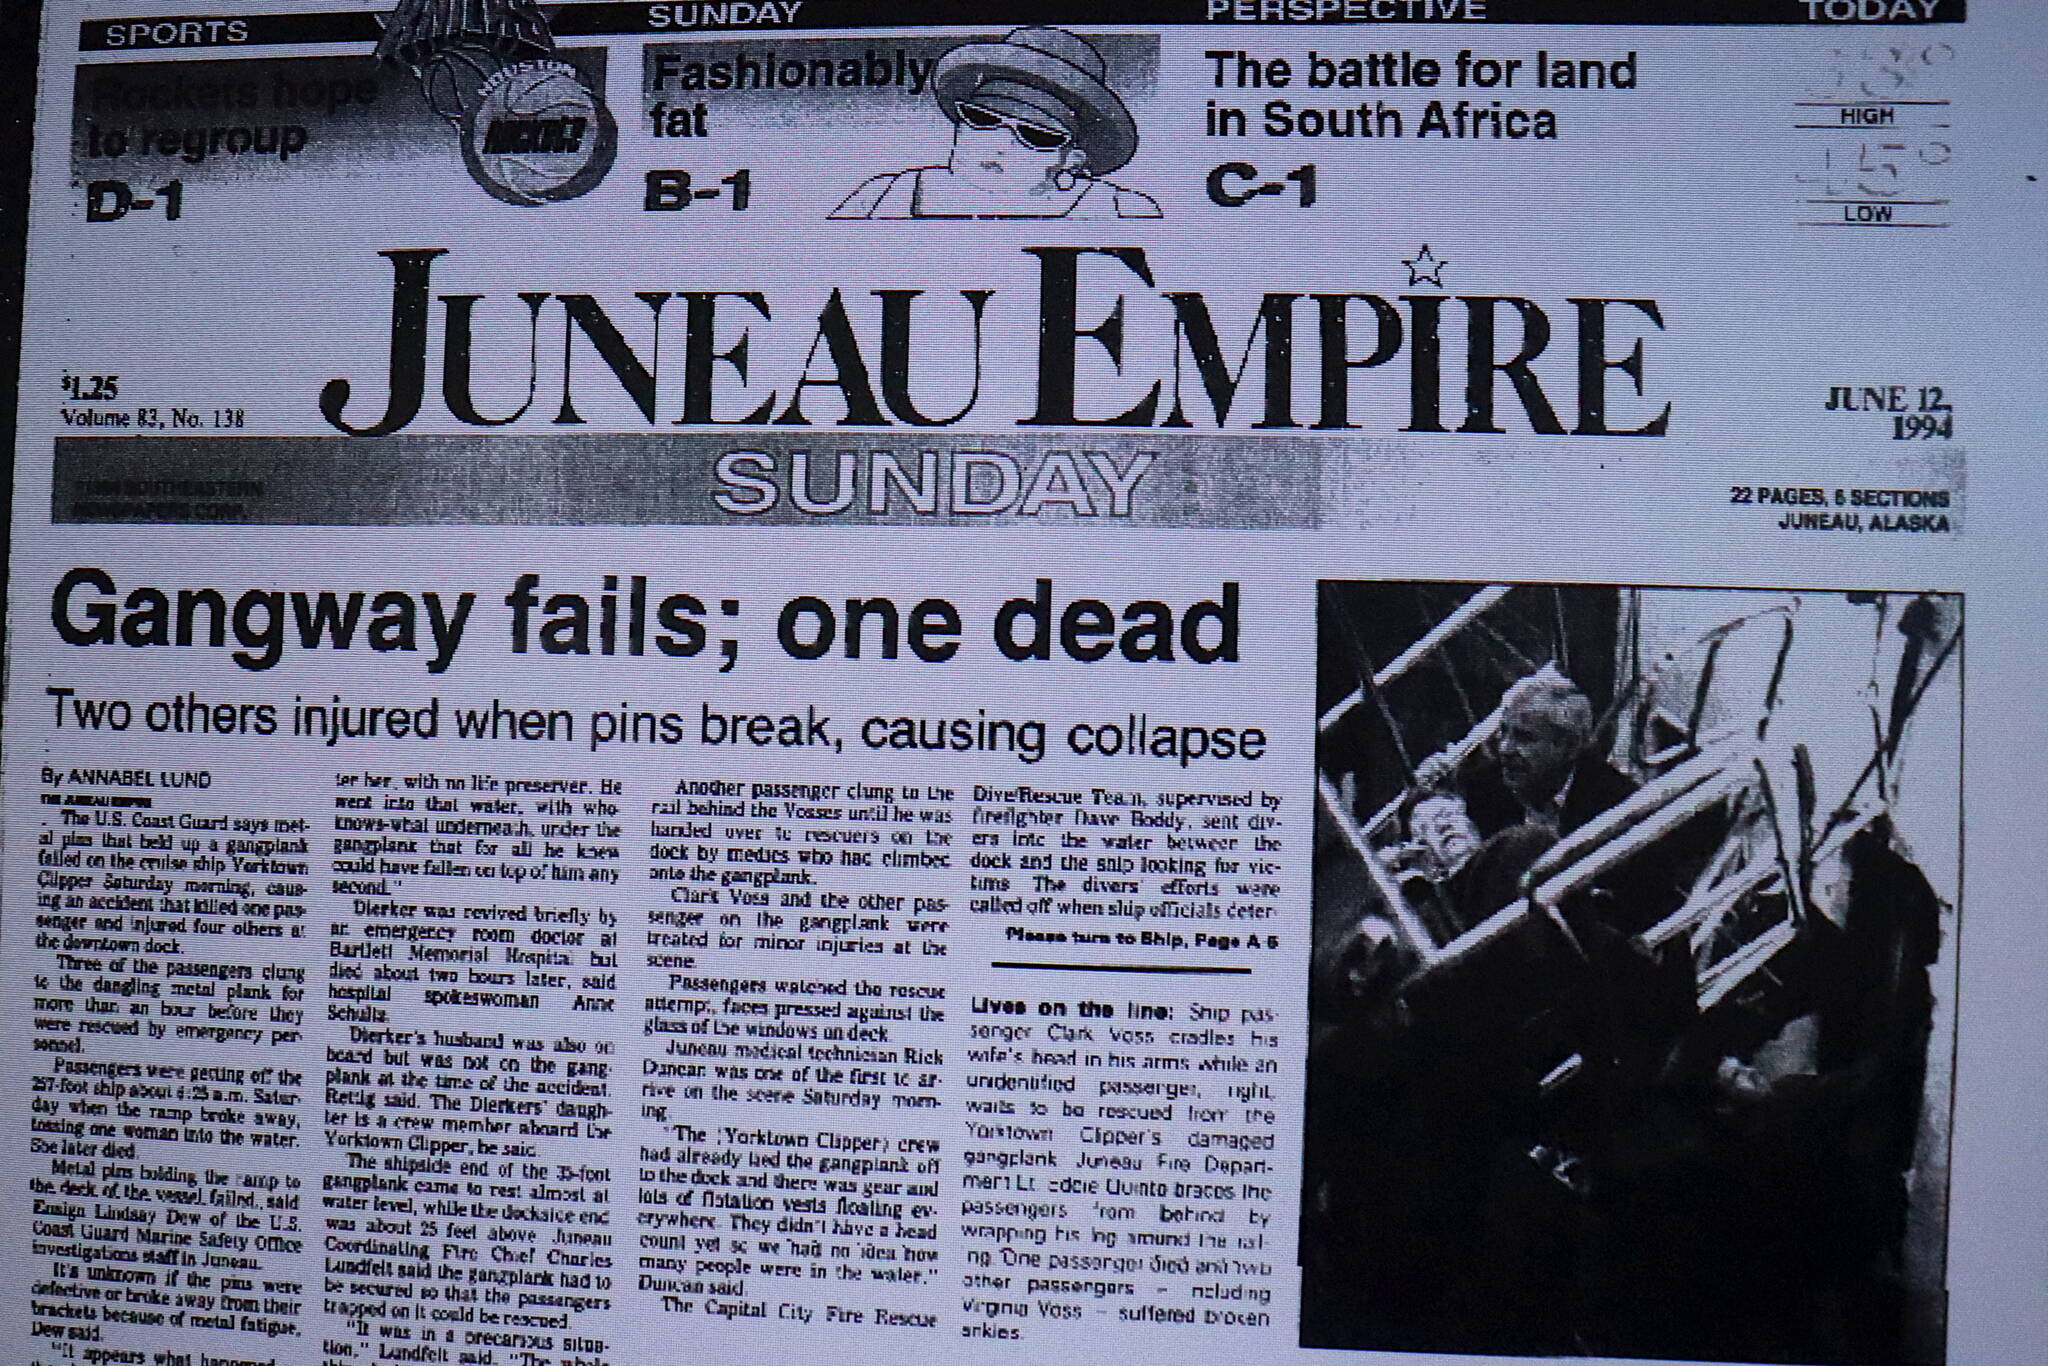 The front page of the Juneau Empire on June 12, 1994. (Mark Sabbatini / Juneau Empire)